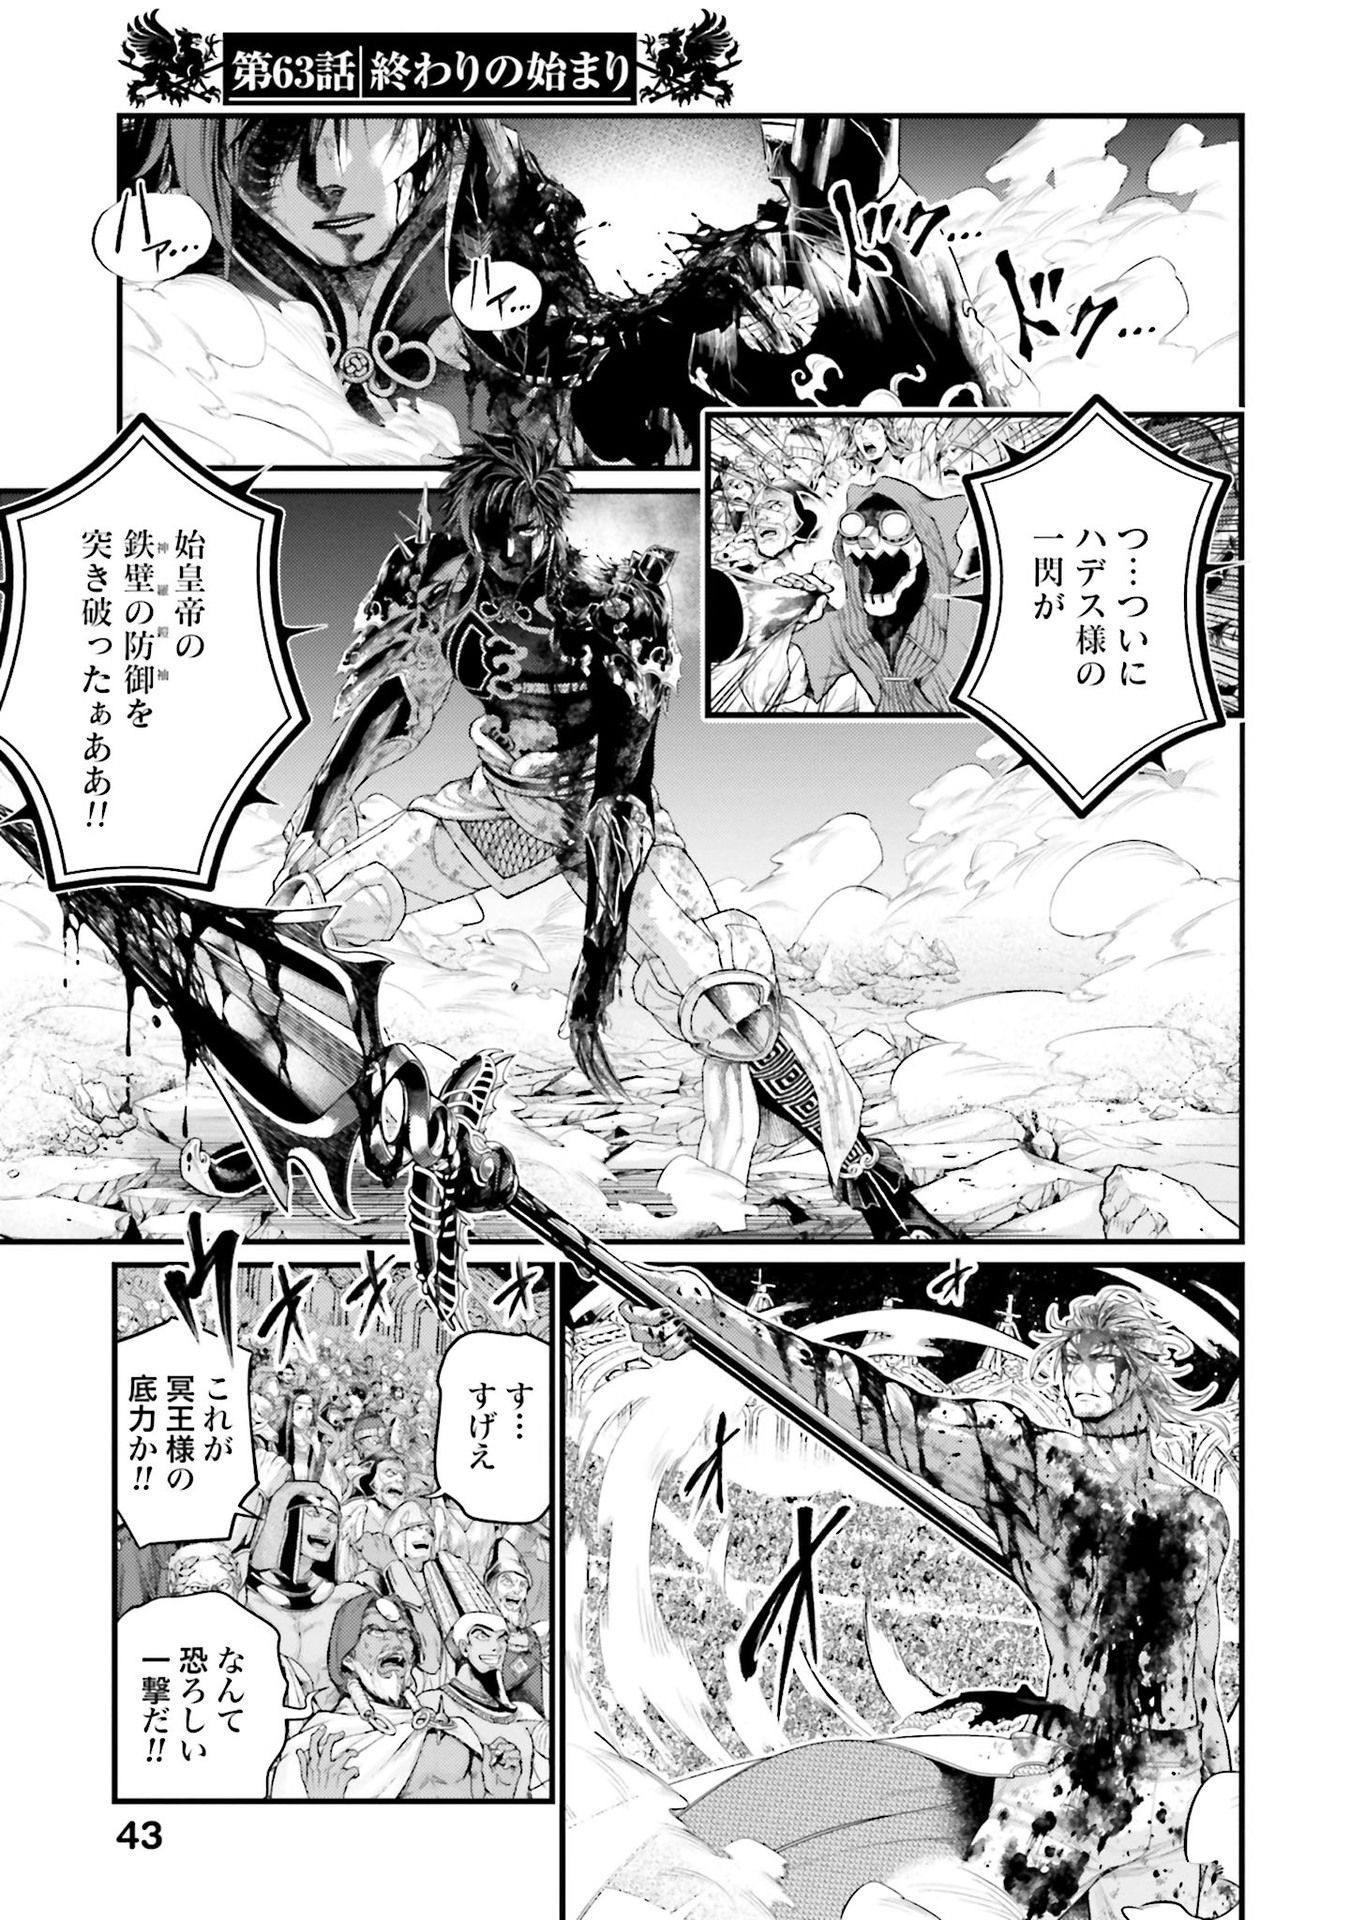 Spoilers for chapter 81 of Record of Ragnarok Geirölul and King